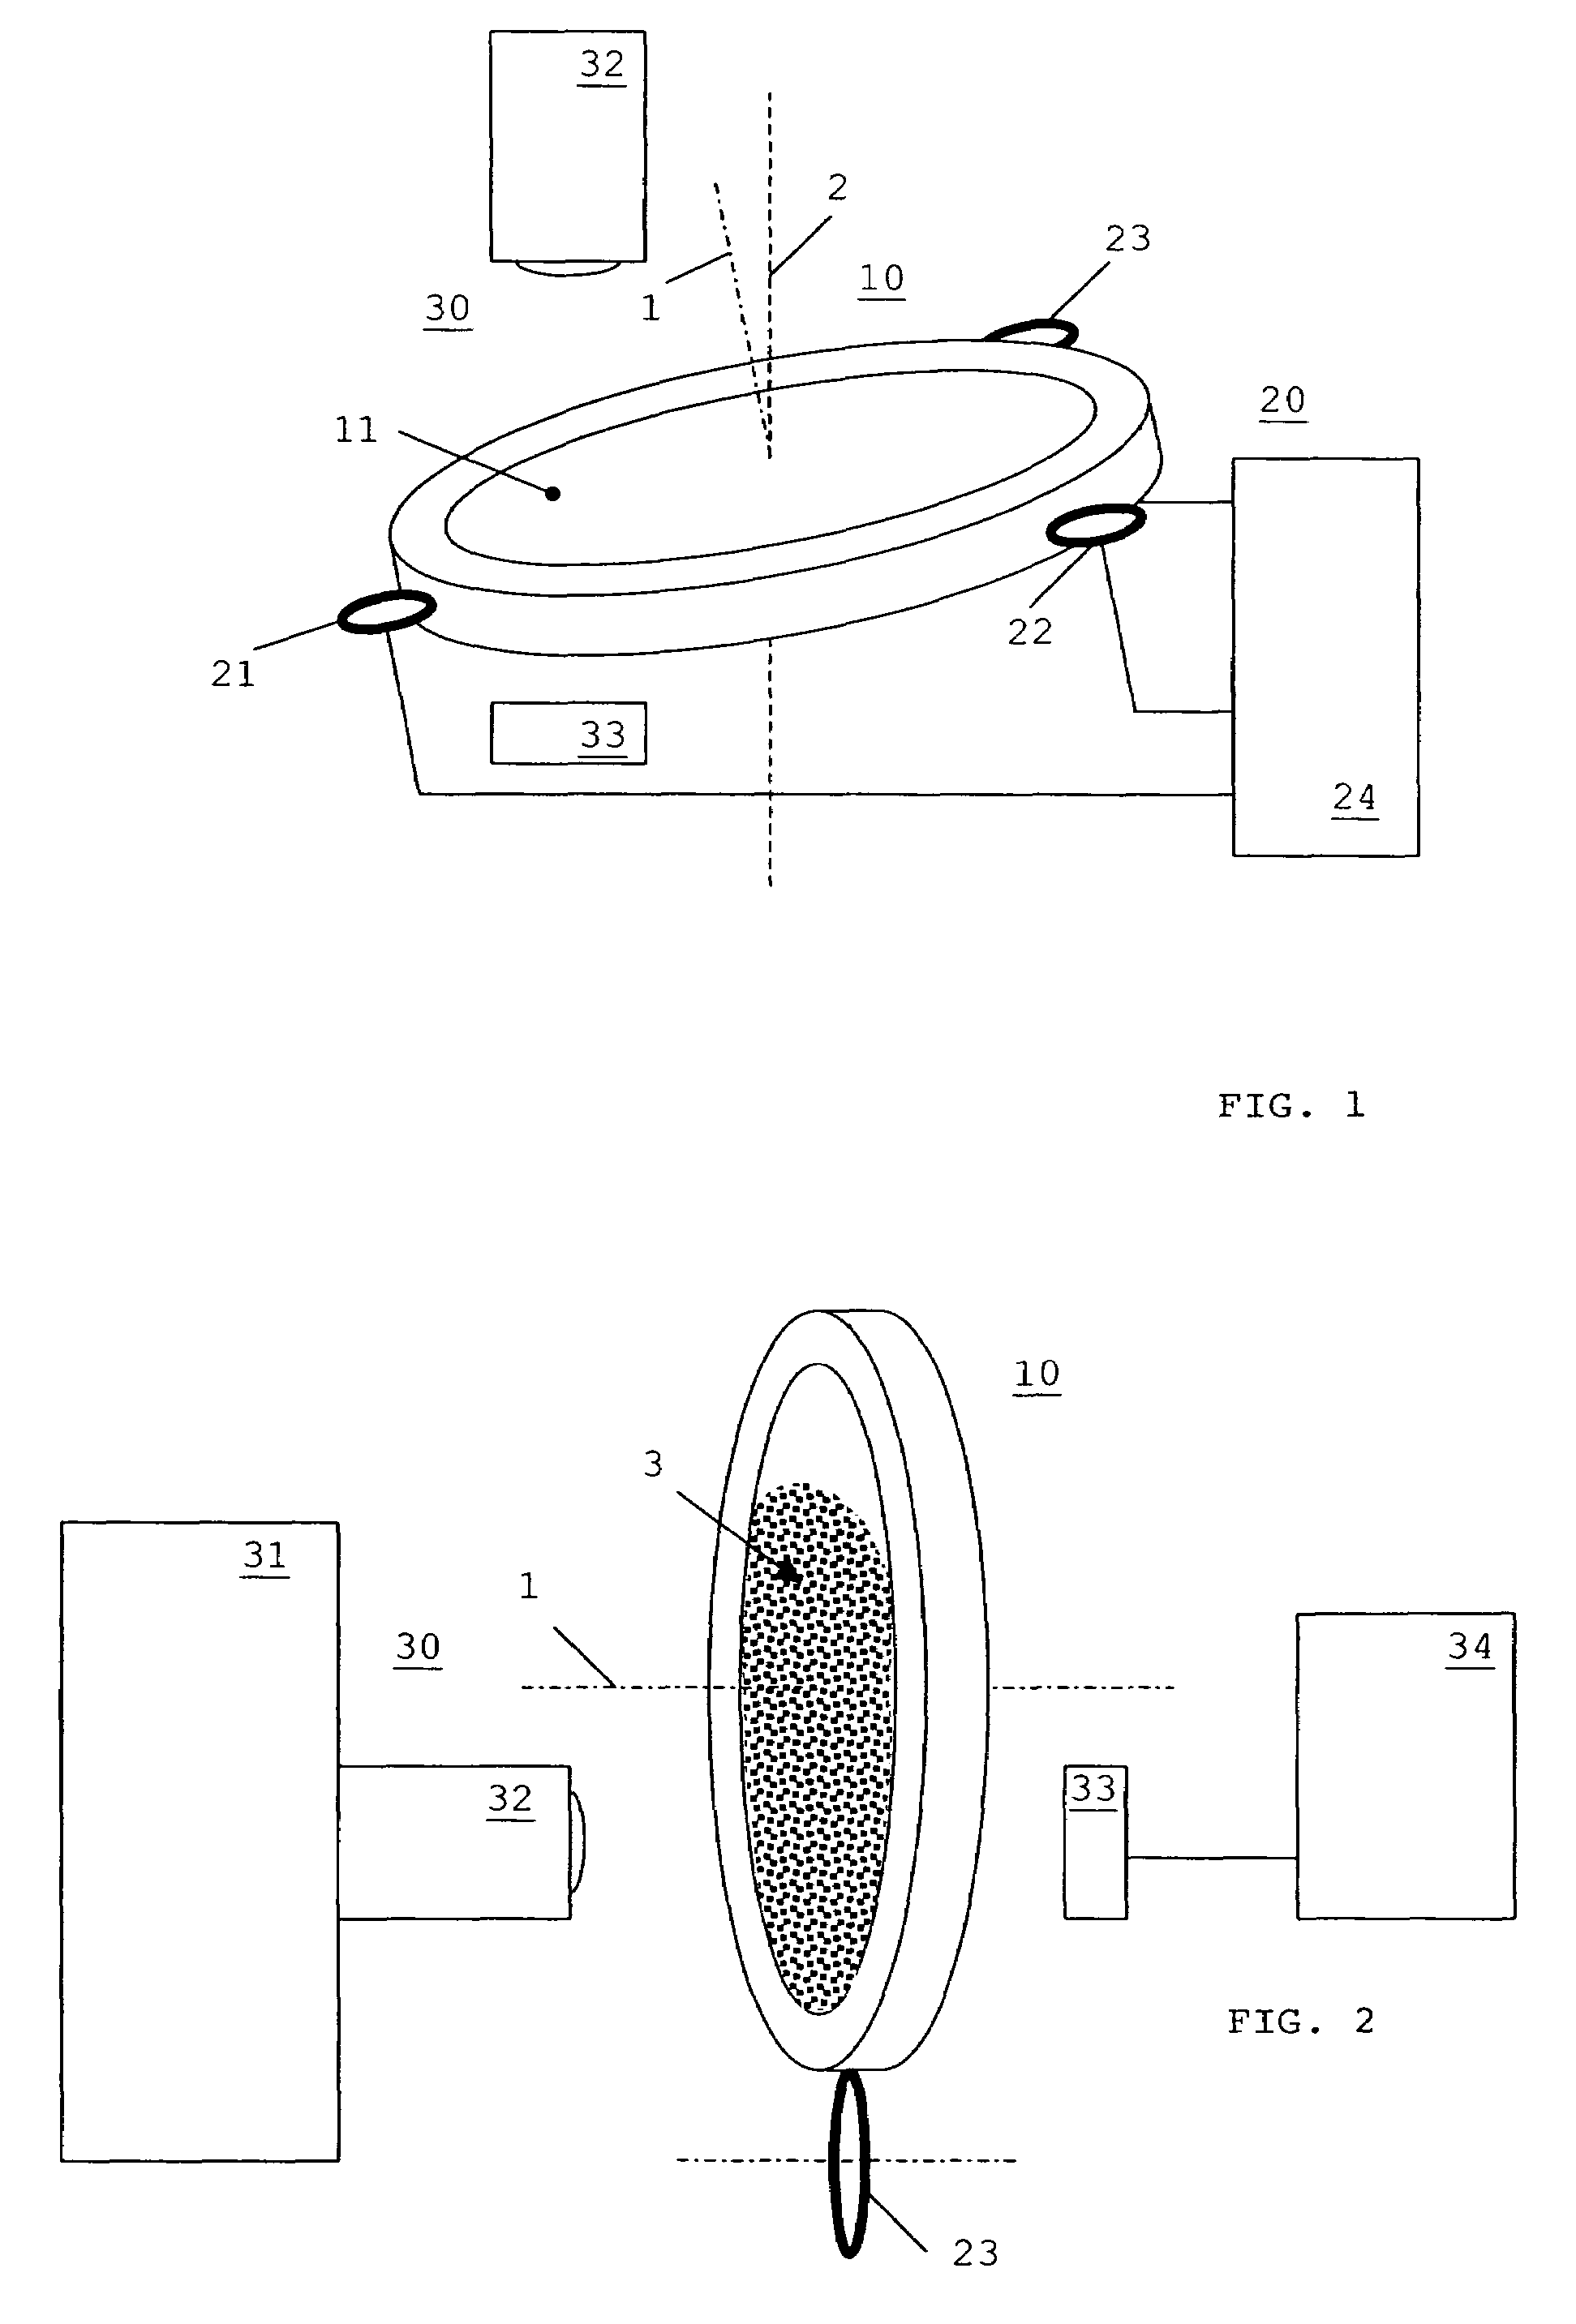 Measuring device, particularly for conducting spectroscopic measurements